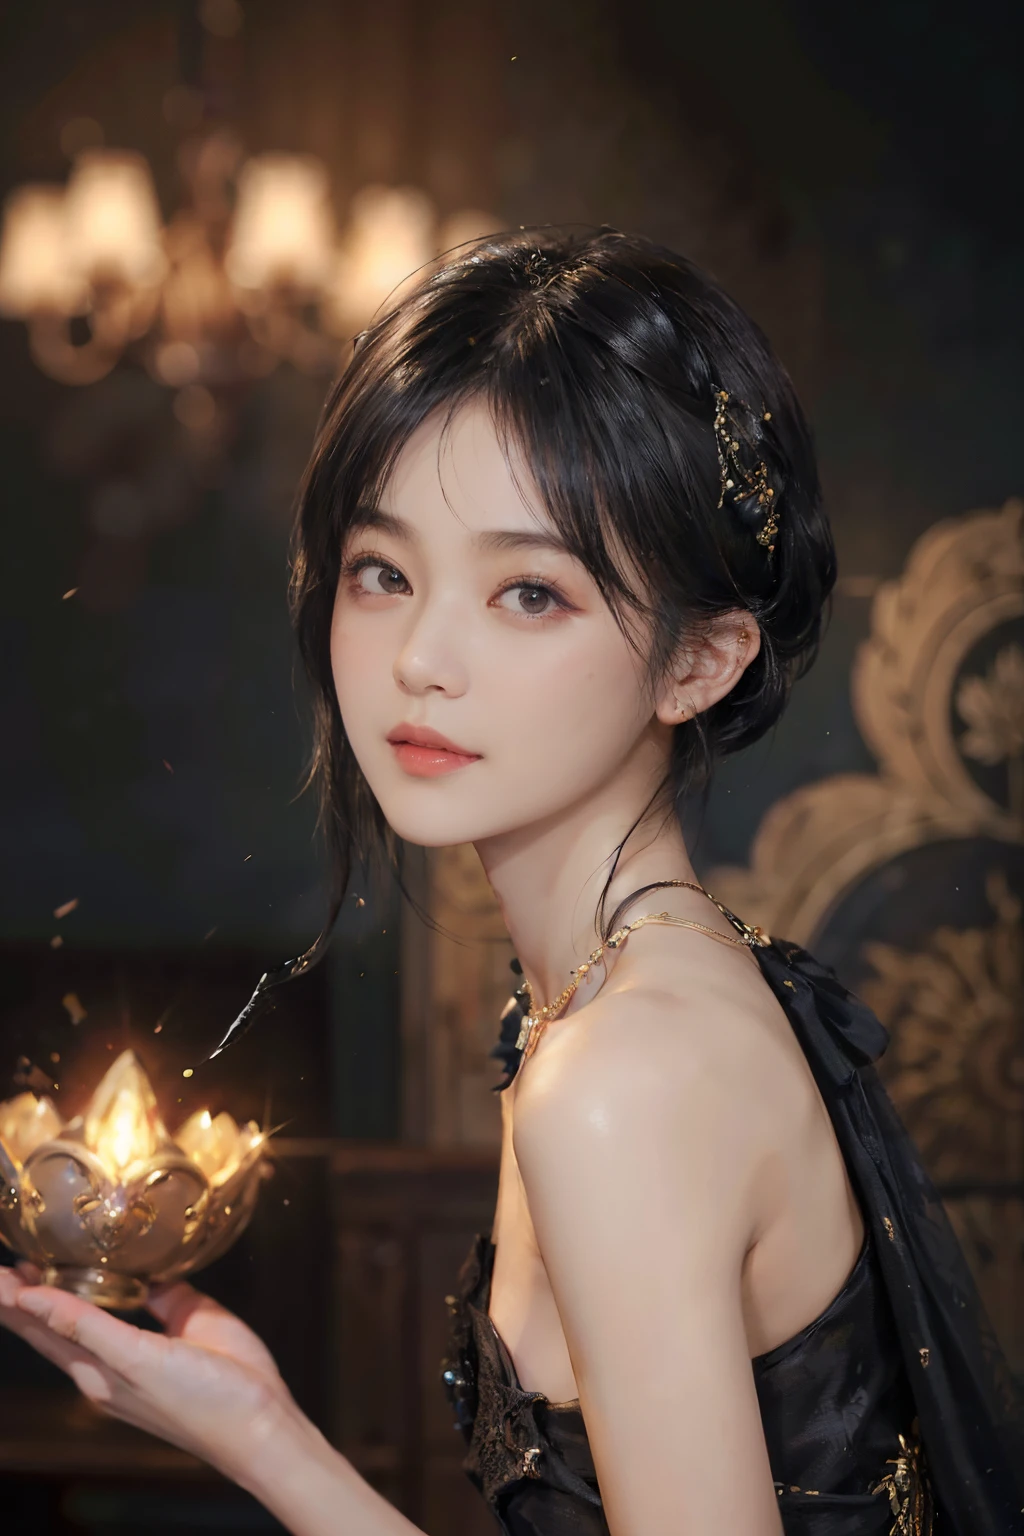 ((1womanl)),  (((Black Shorthair))), （masuter piece：1,3）、top-quality、​masterpiece、hight resolution、Original、highly detailed wallpaper、dress code、Luxurious necklace, A slight smil、a small face、(Breast)、(Light on Face)、Live-action style, Beautiful facial features, darkened room, ((Hu Dilan))